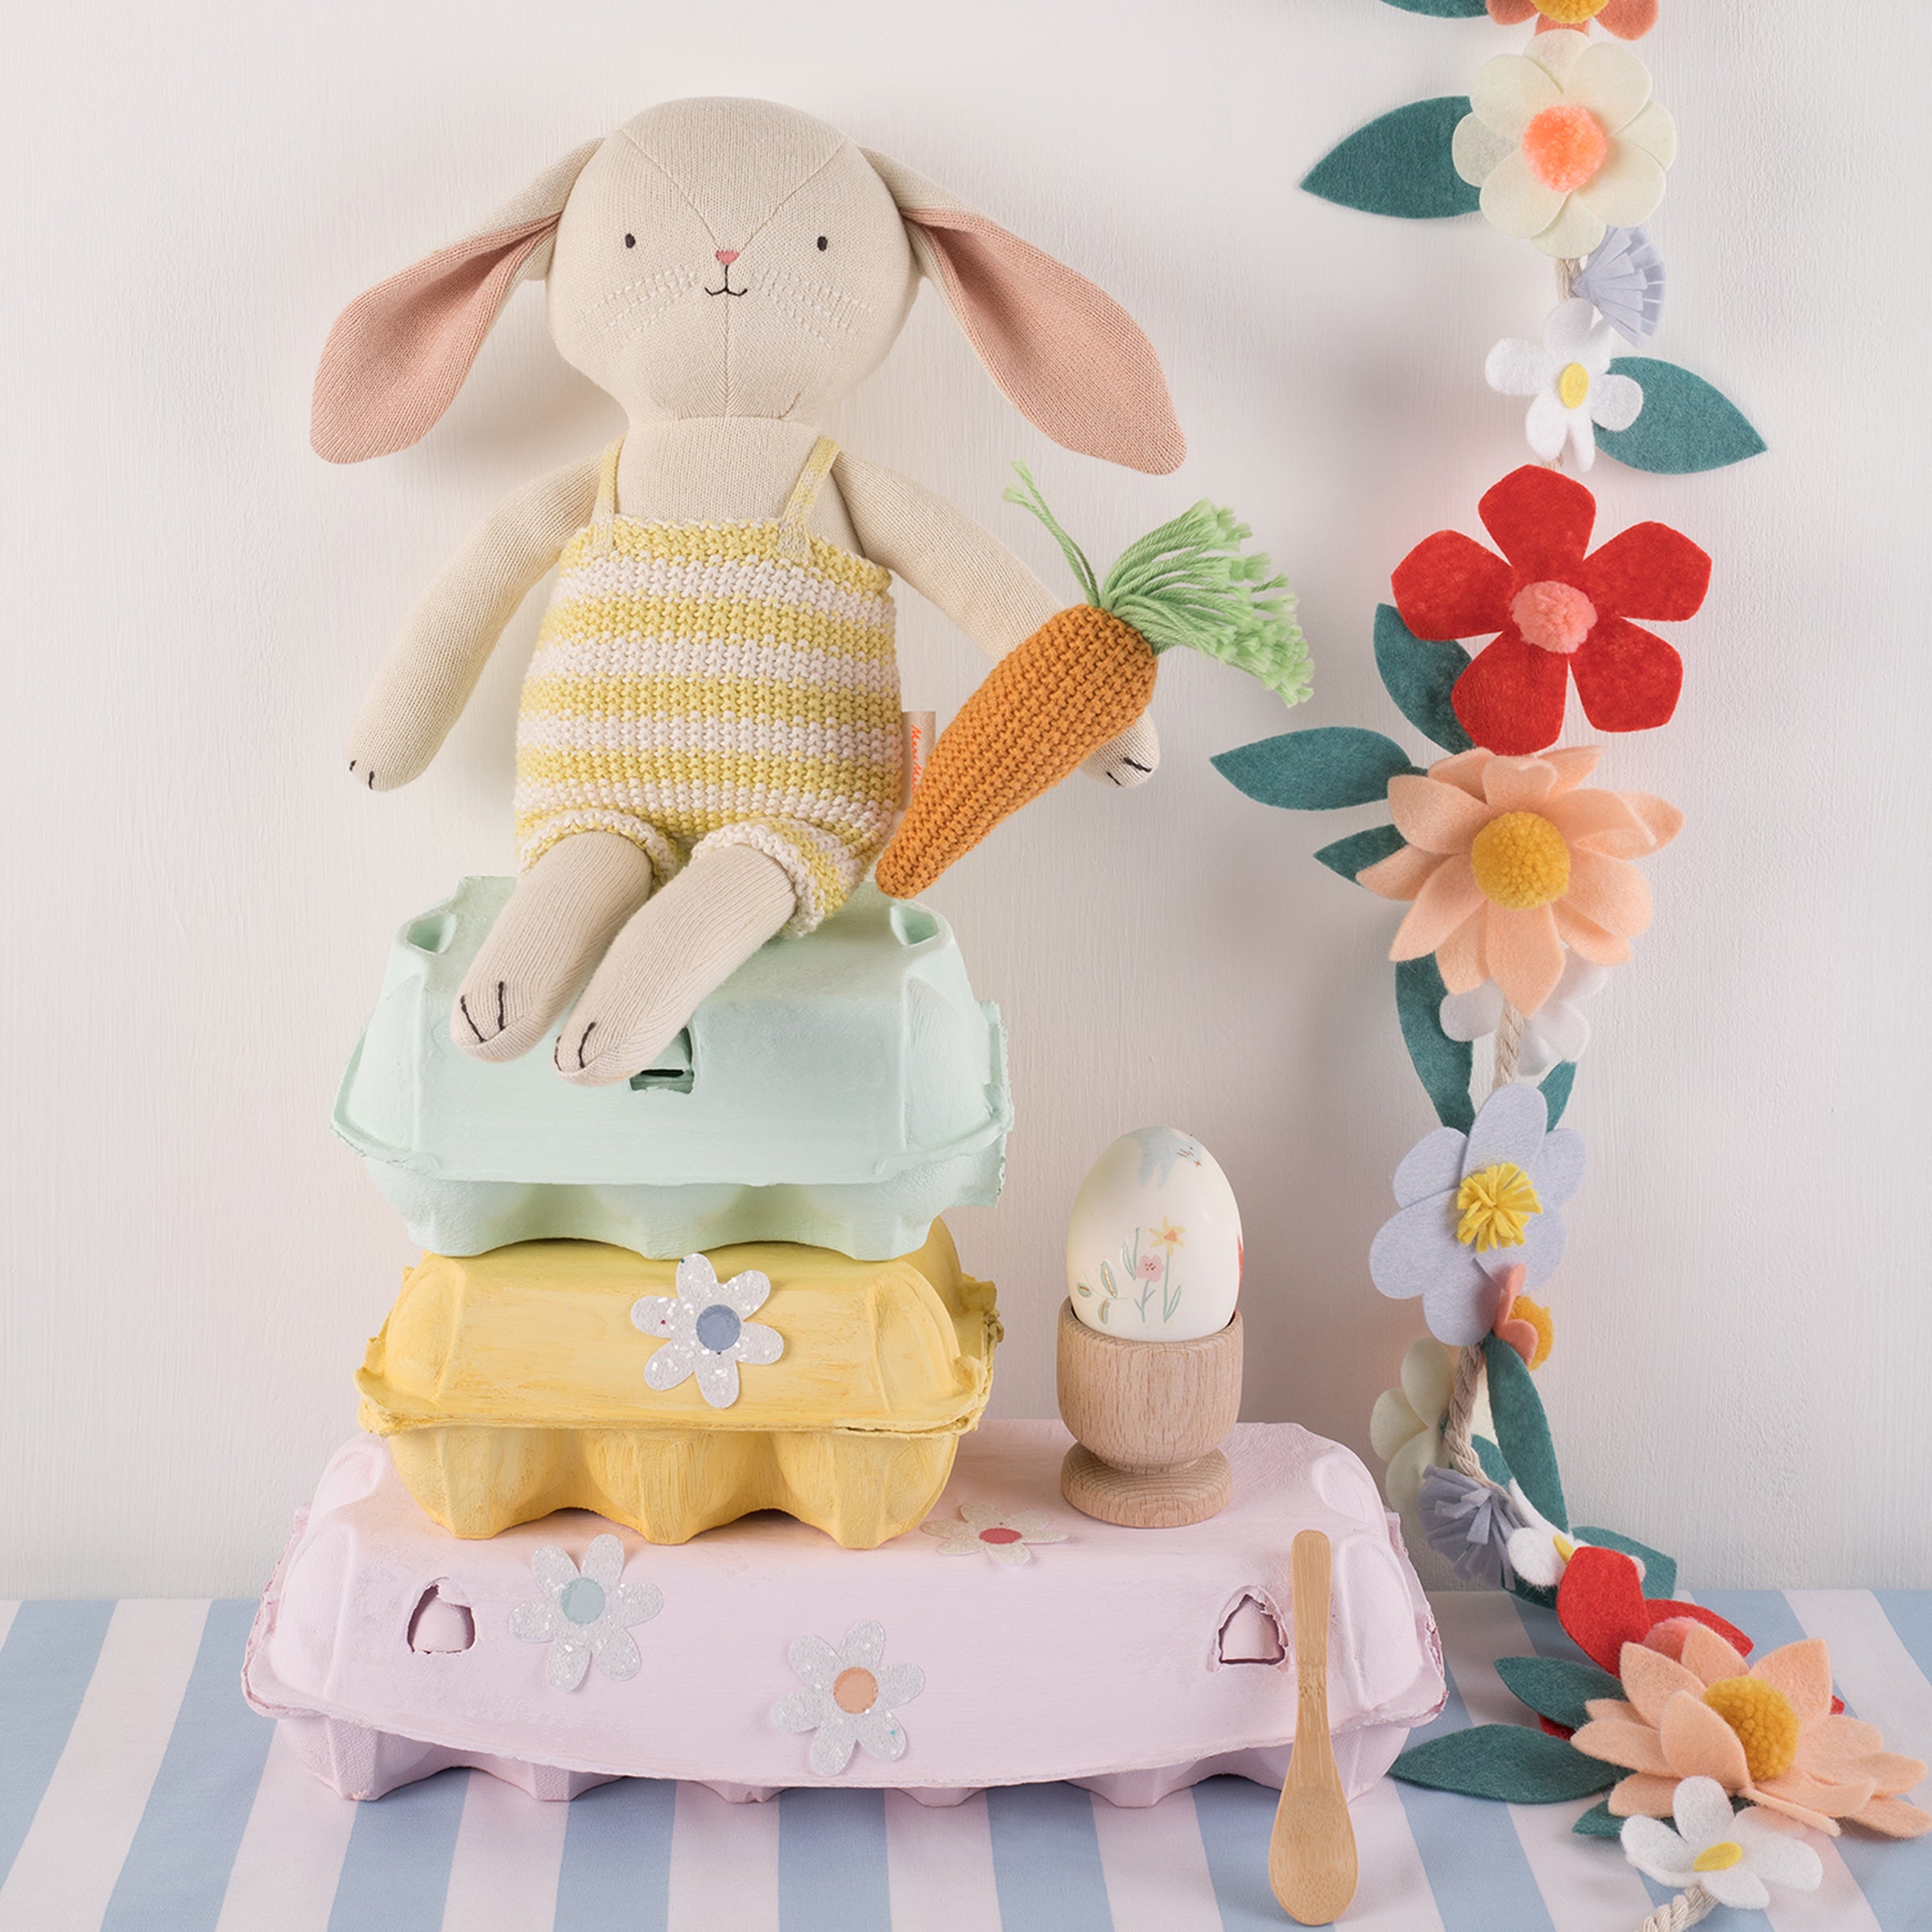 Our Honey bunny fabric toy, made from knitted organic cotton, is a wonderful soft toy for kids.